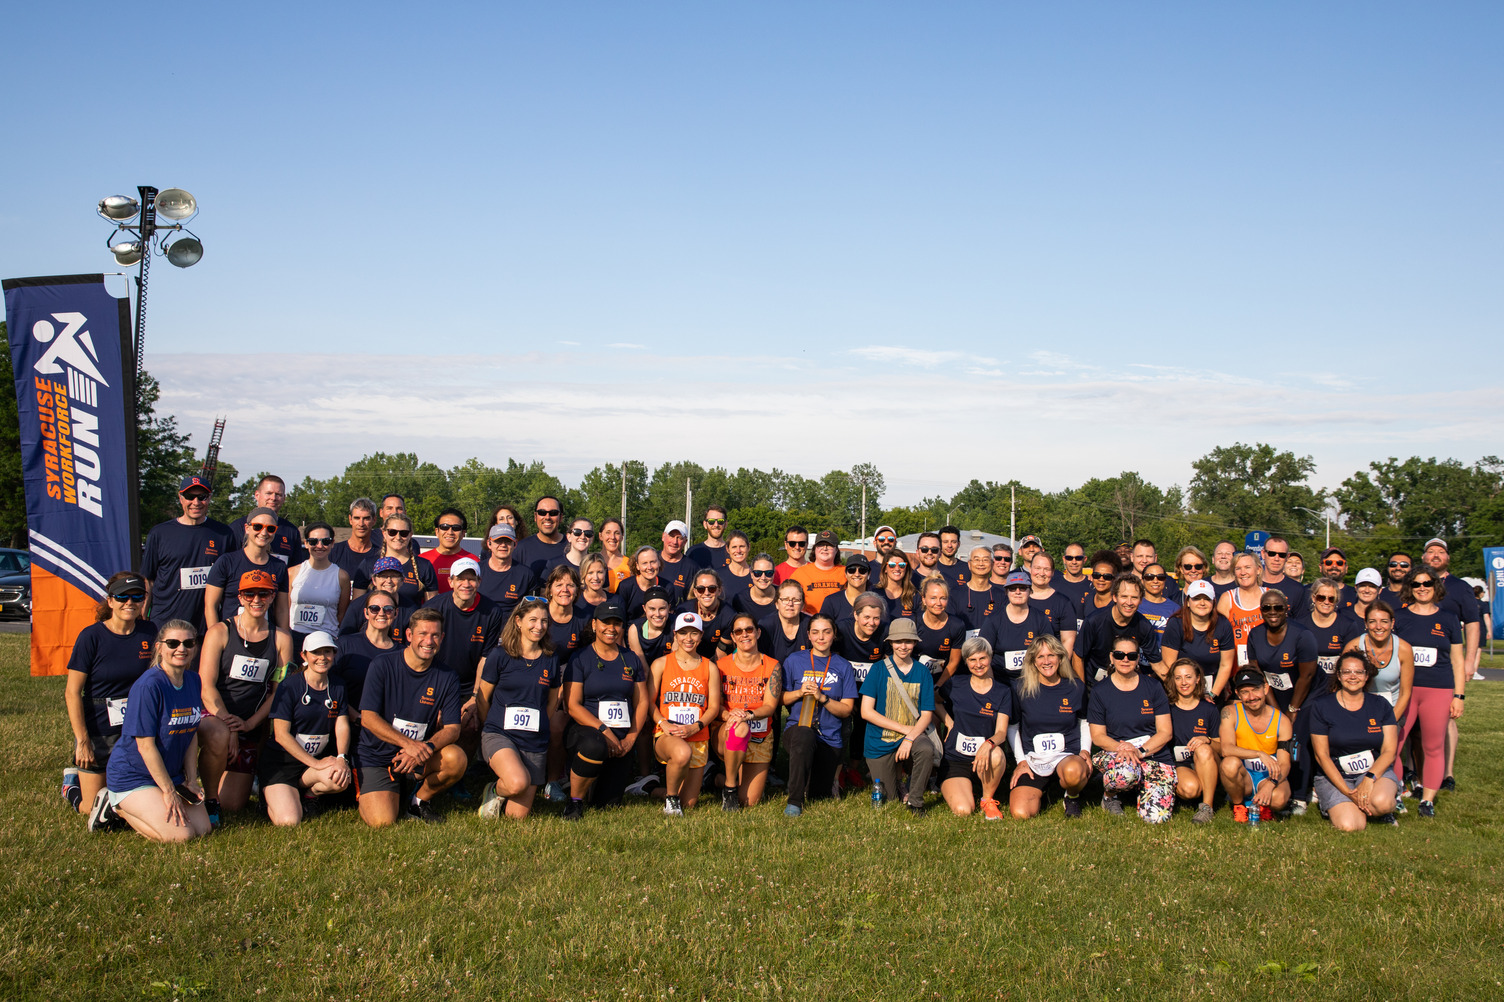 Large group of faculty/staff participants in the Syracuse Workforce Run